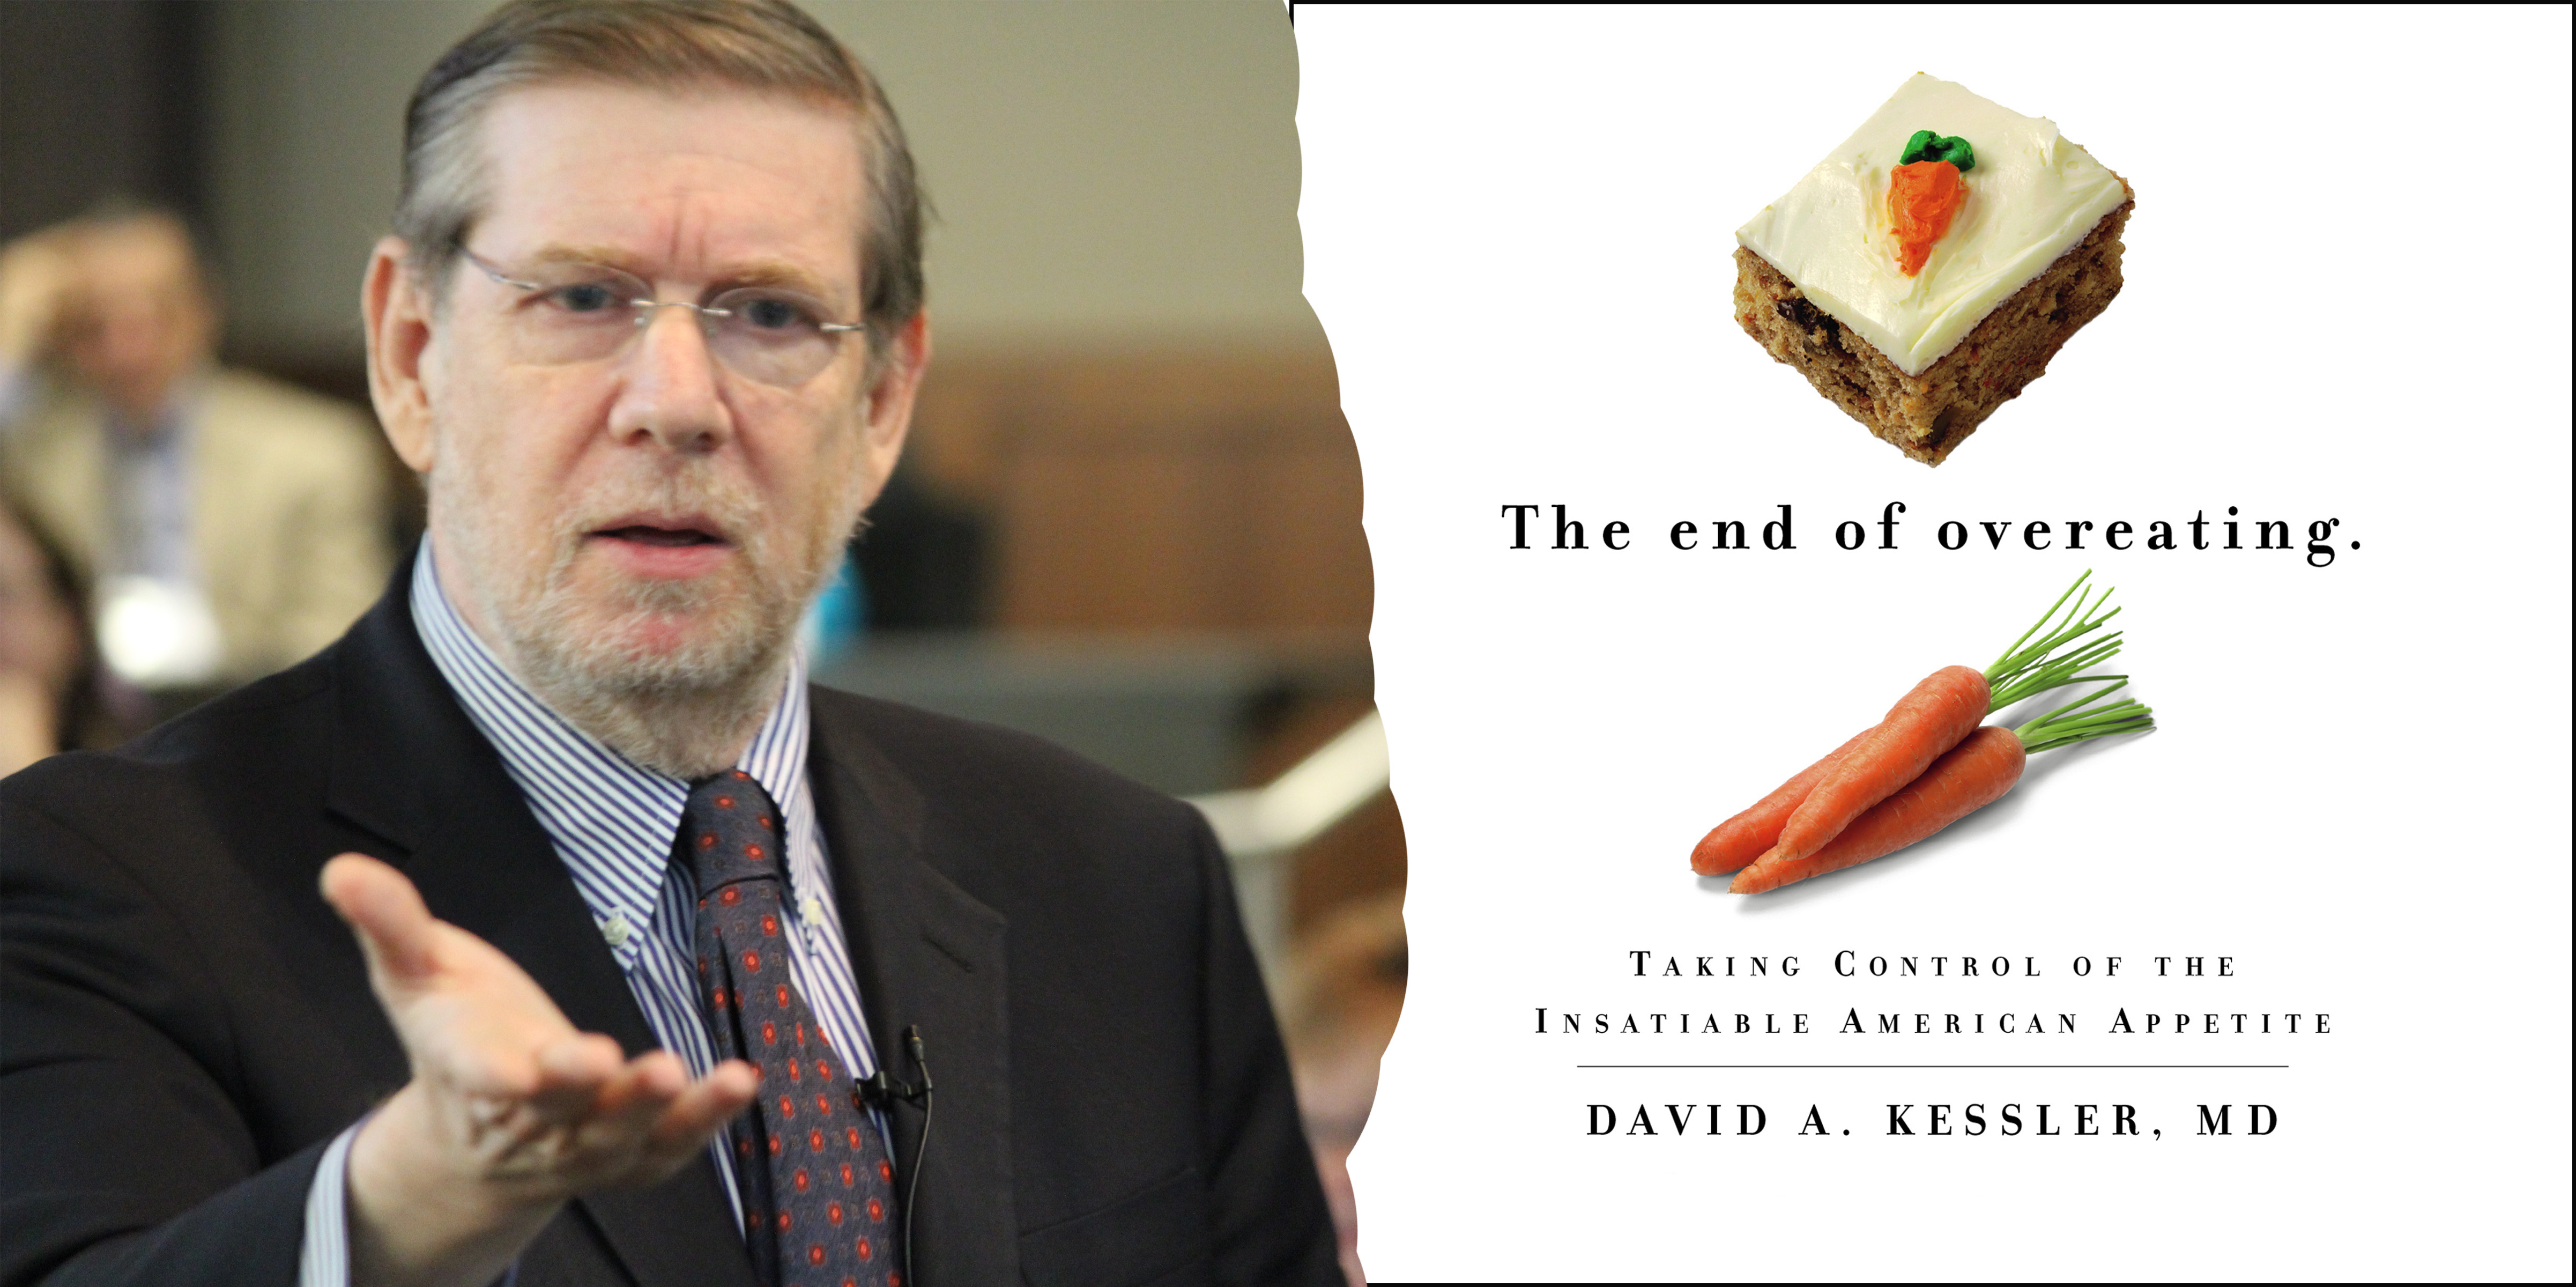 The End of Overeating: Taking Control of the Insatiable American Appetite, by David Kessler